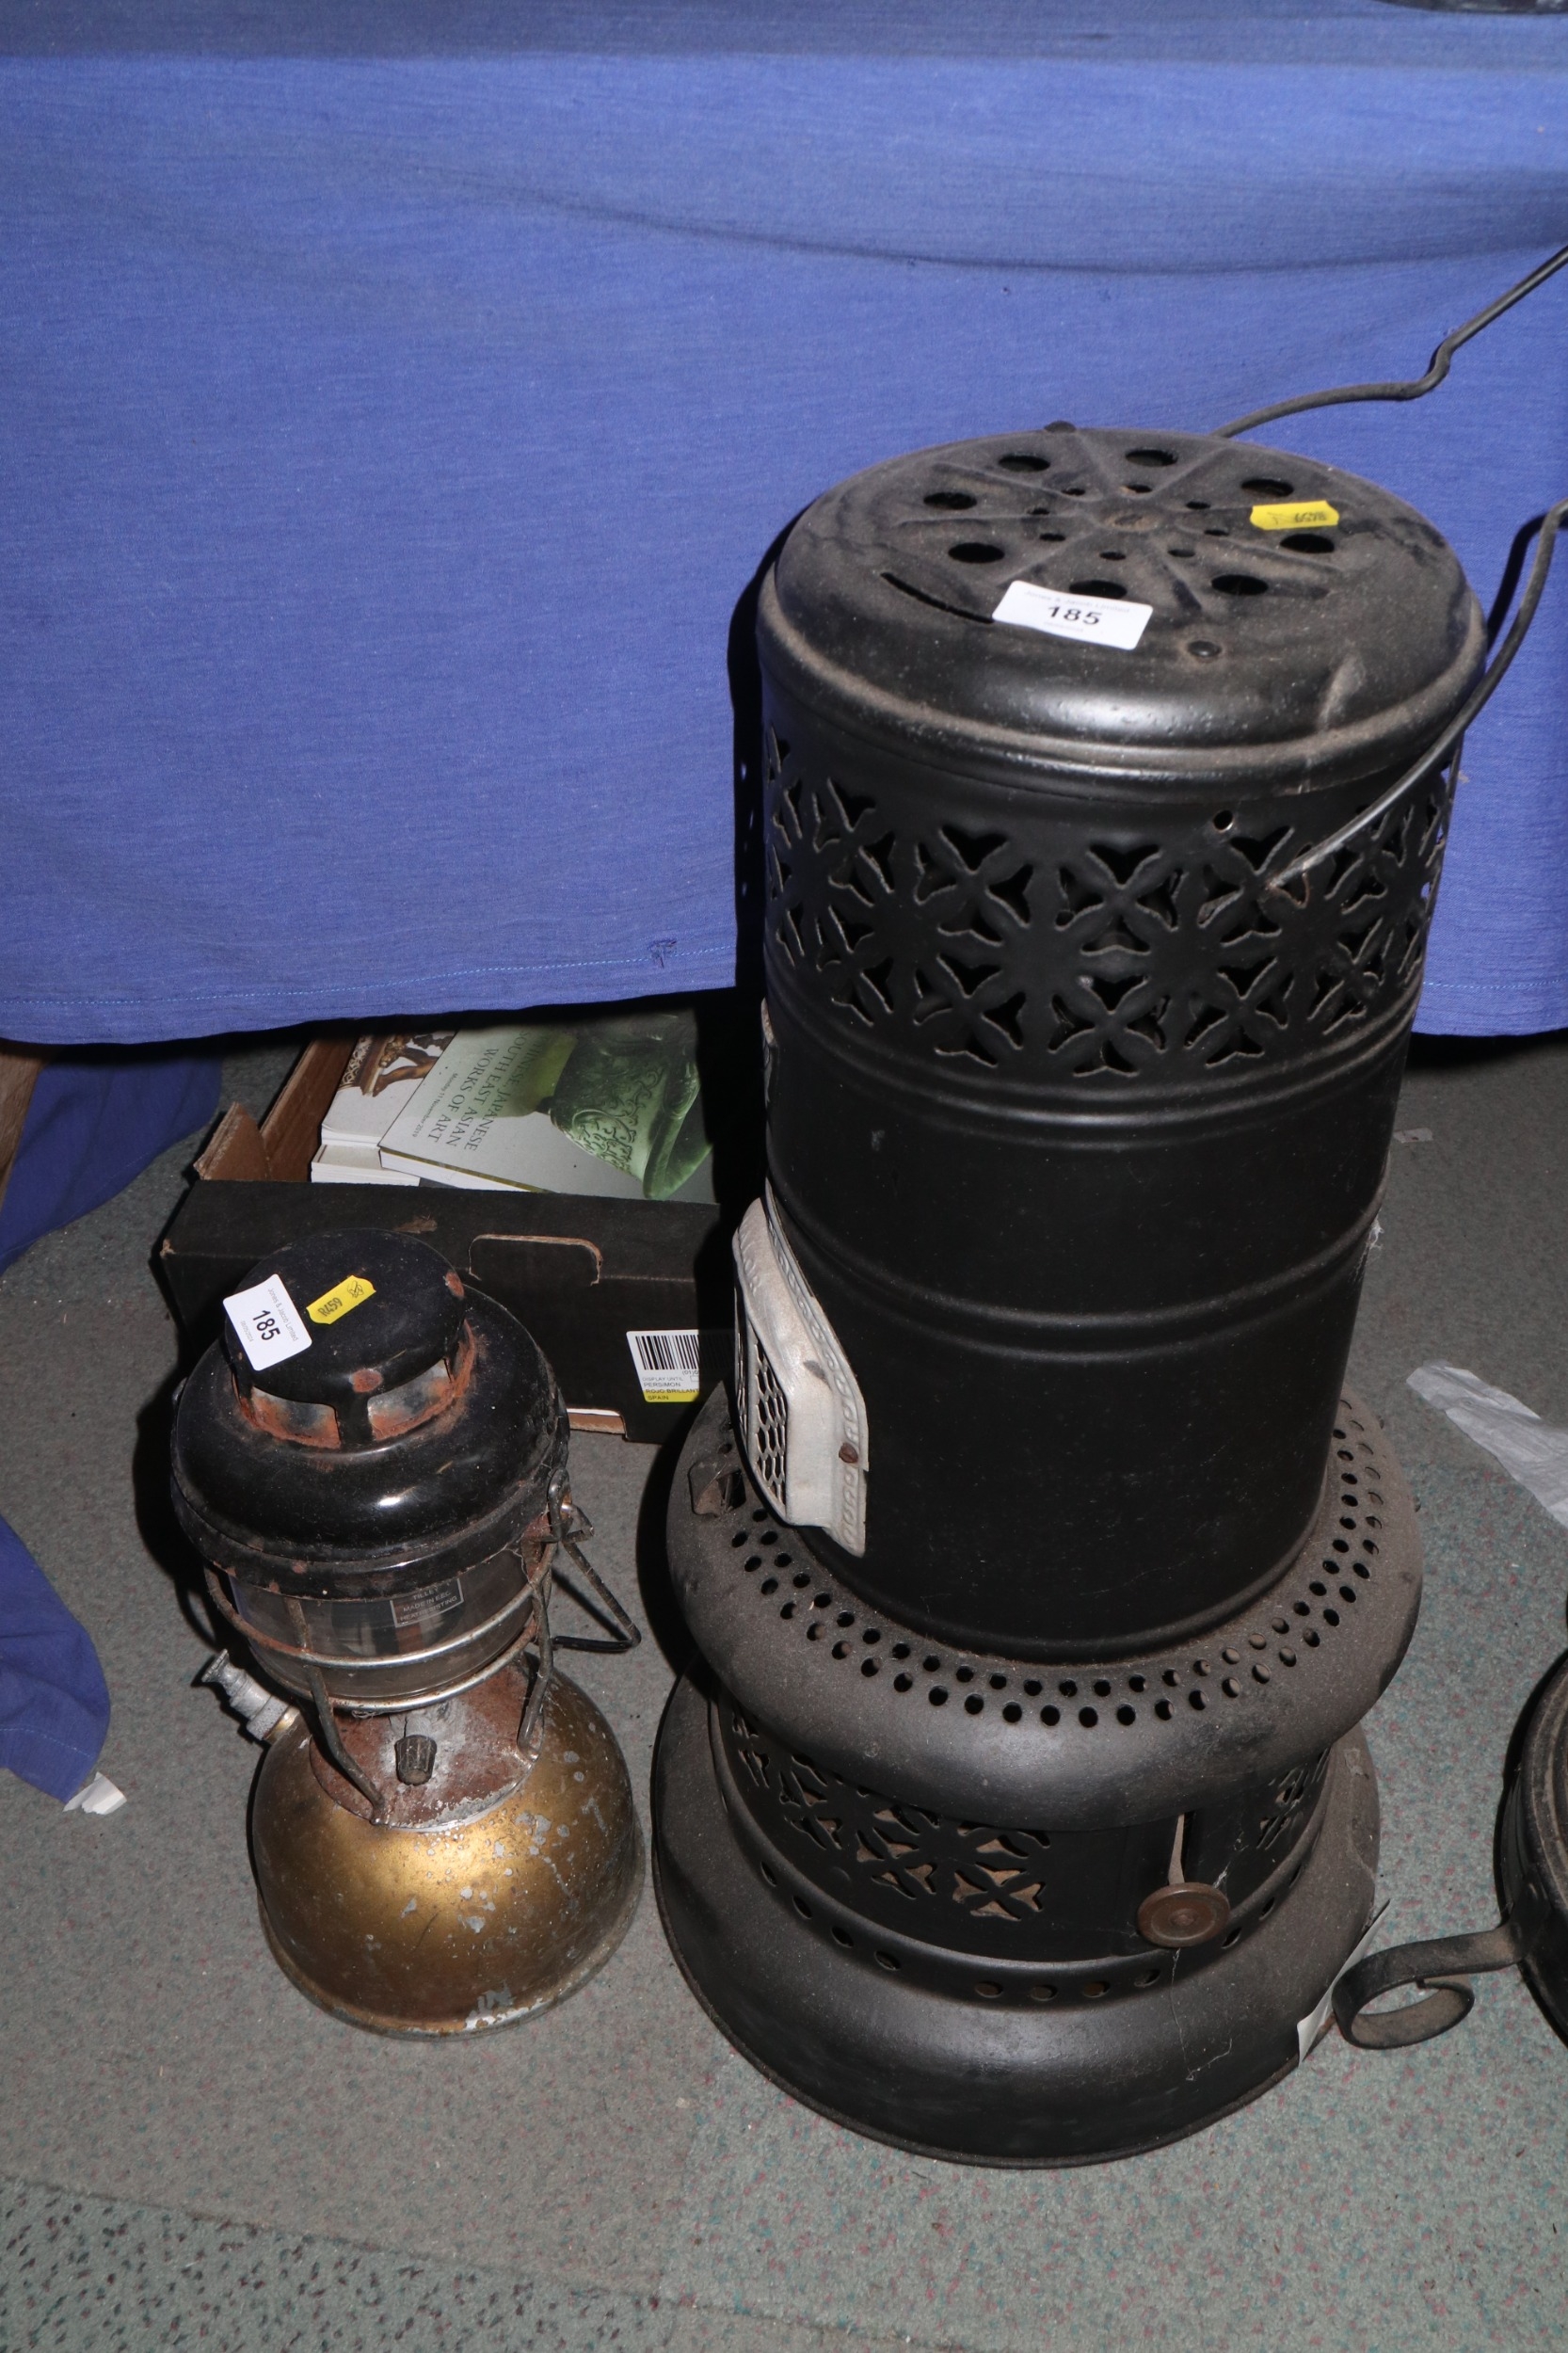 A Valor black metal room heater with pierced decoration, 24" high, and a smaller burner, 13 1/2"